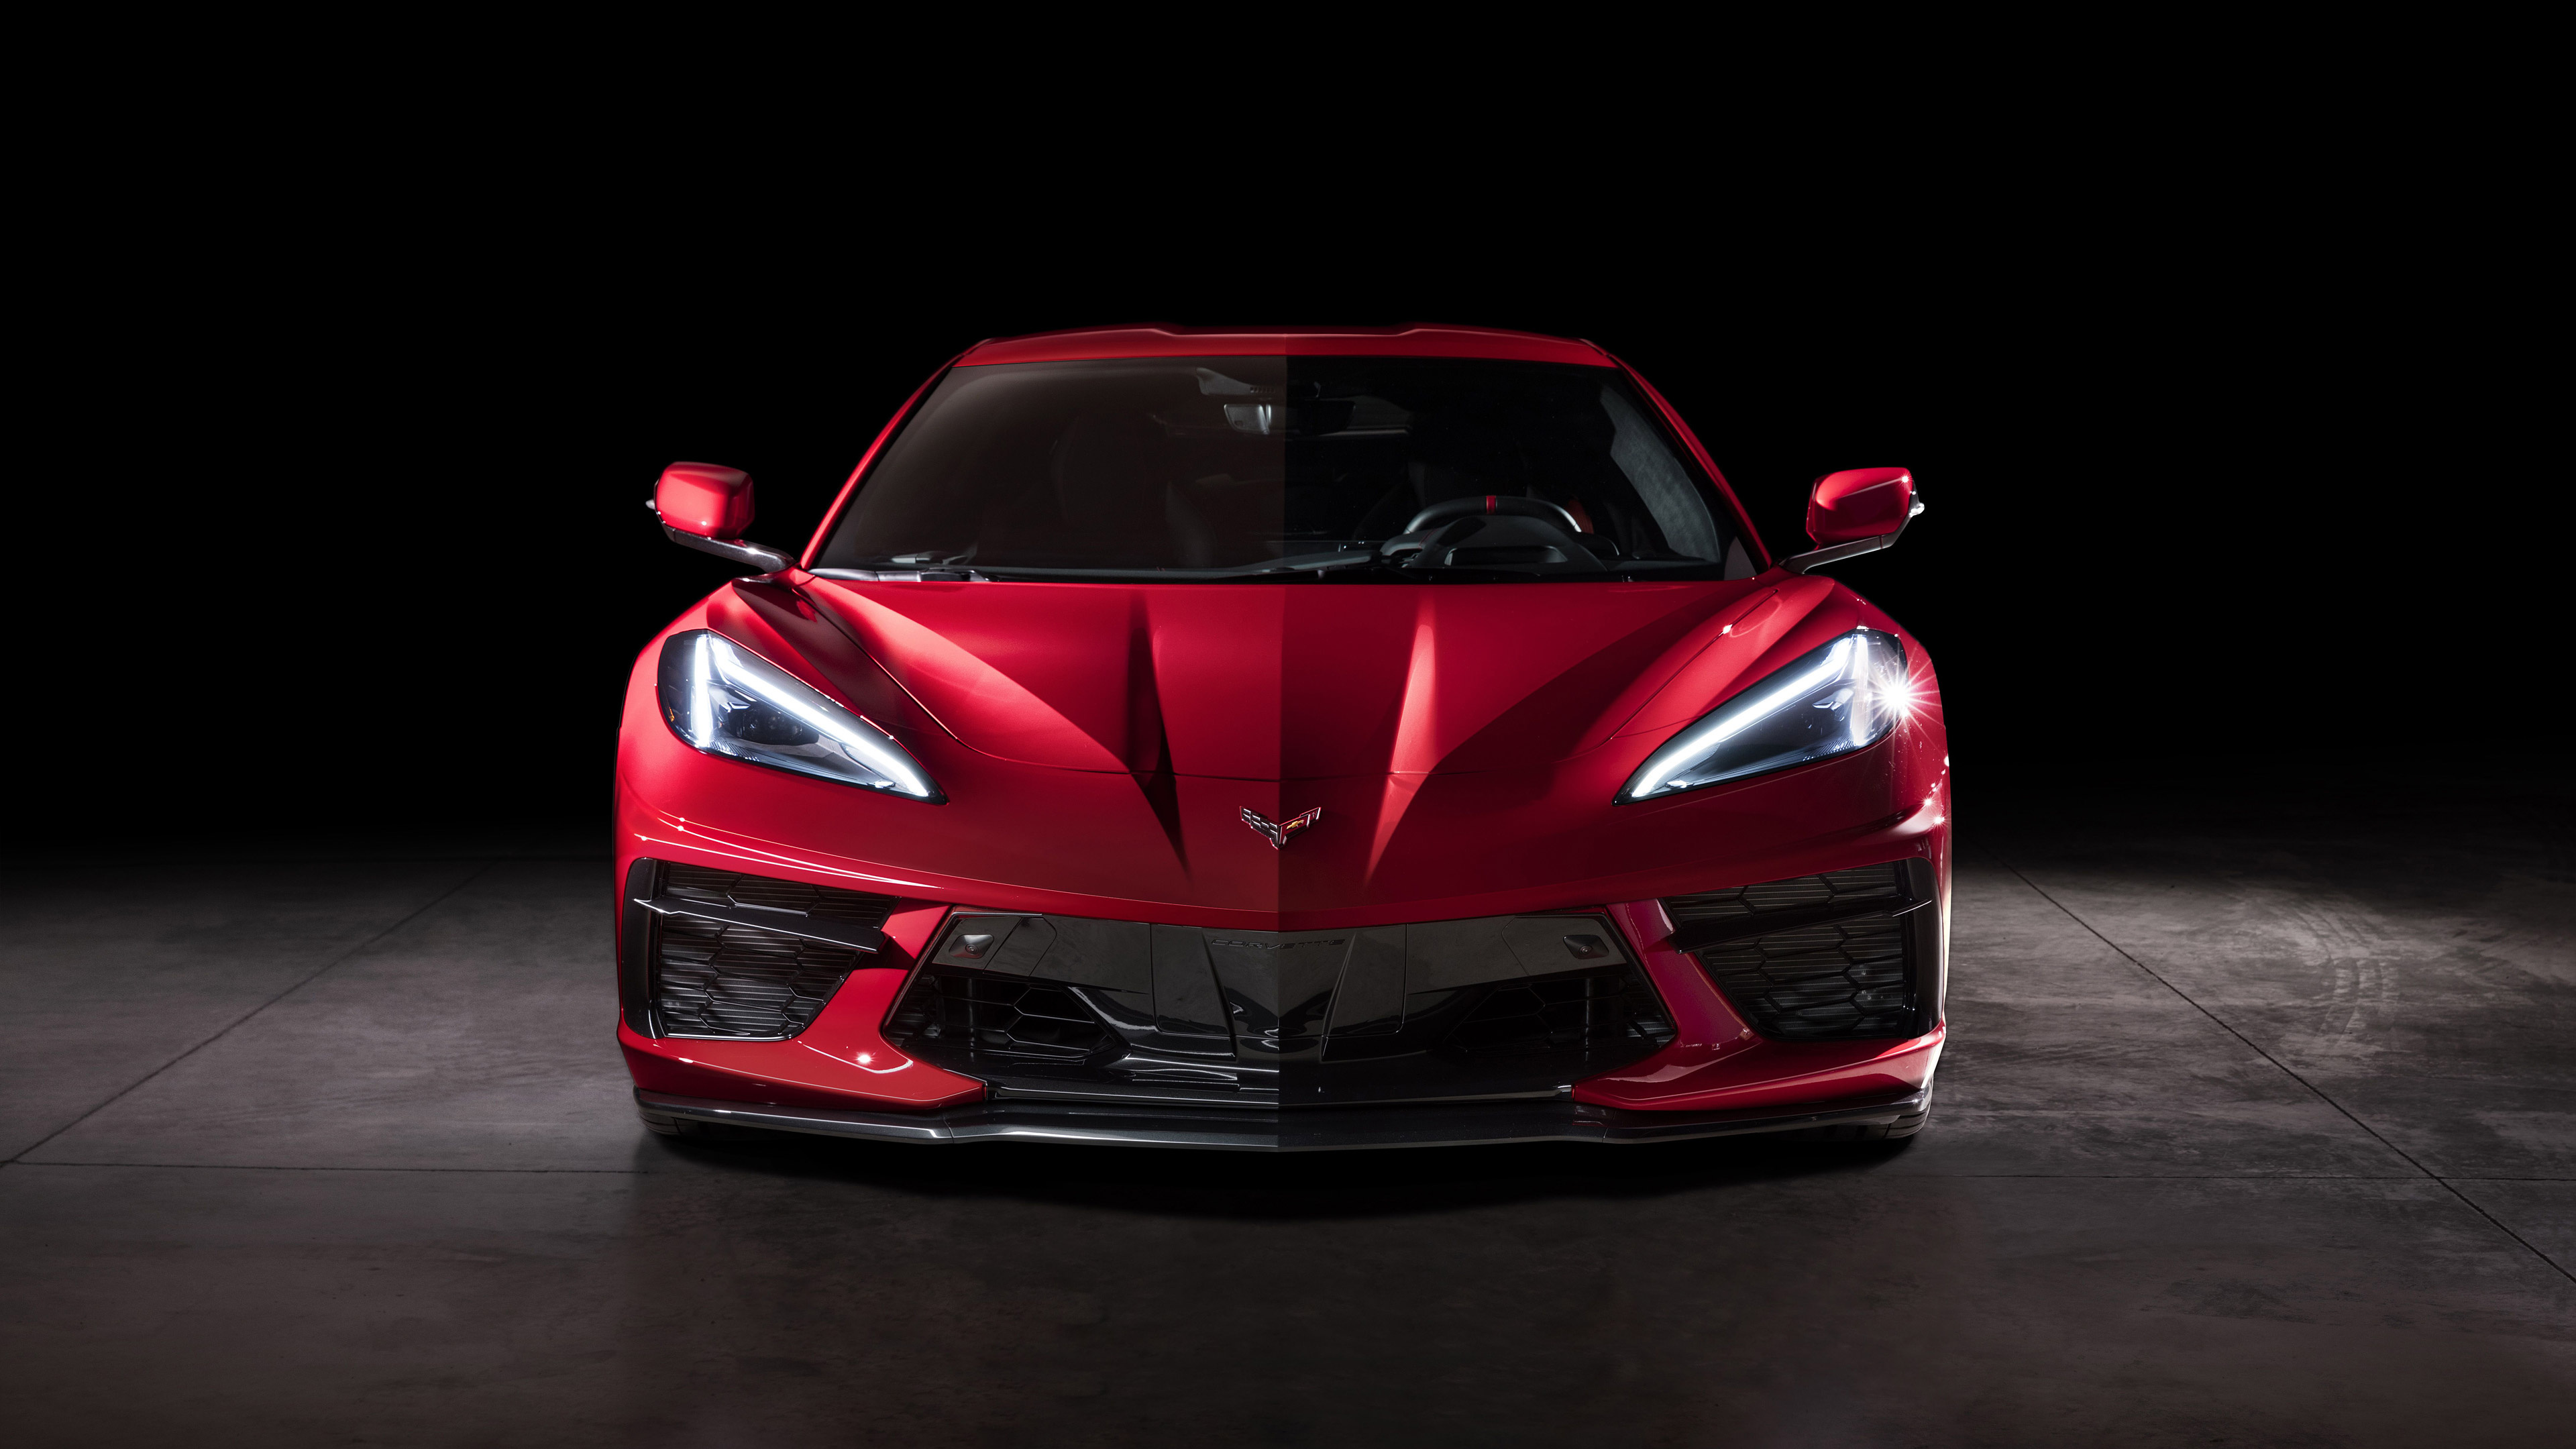 Corvette: The 2020 Chevy C8 Stingray, A red sports car, Adaptive LED lights, A supercharged engine. 3840x2160 4K Wallpaper.